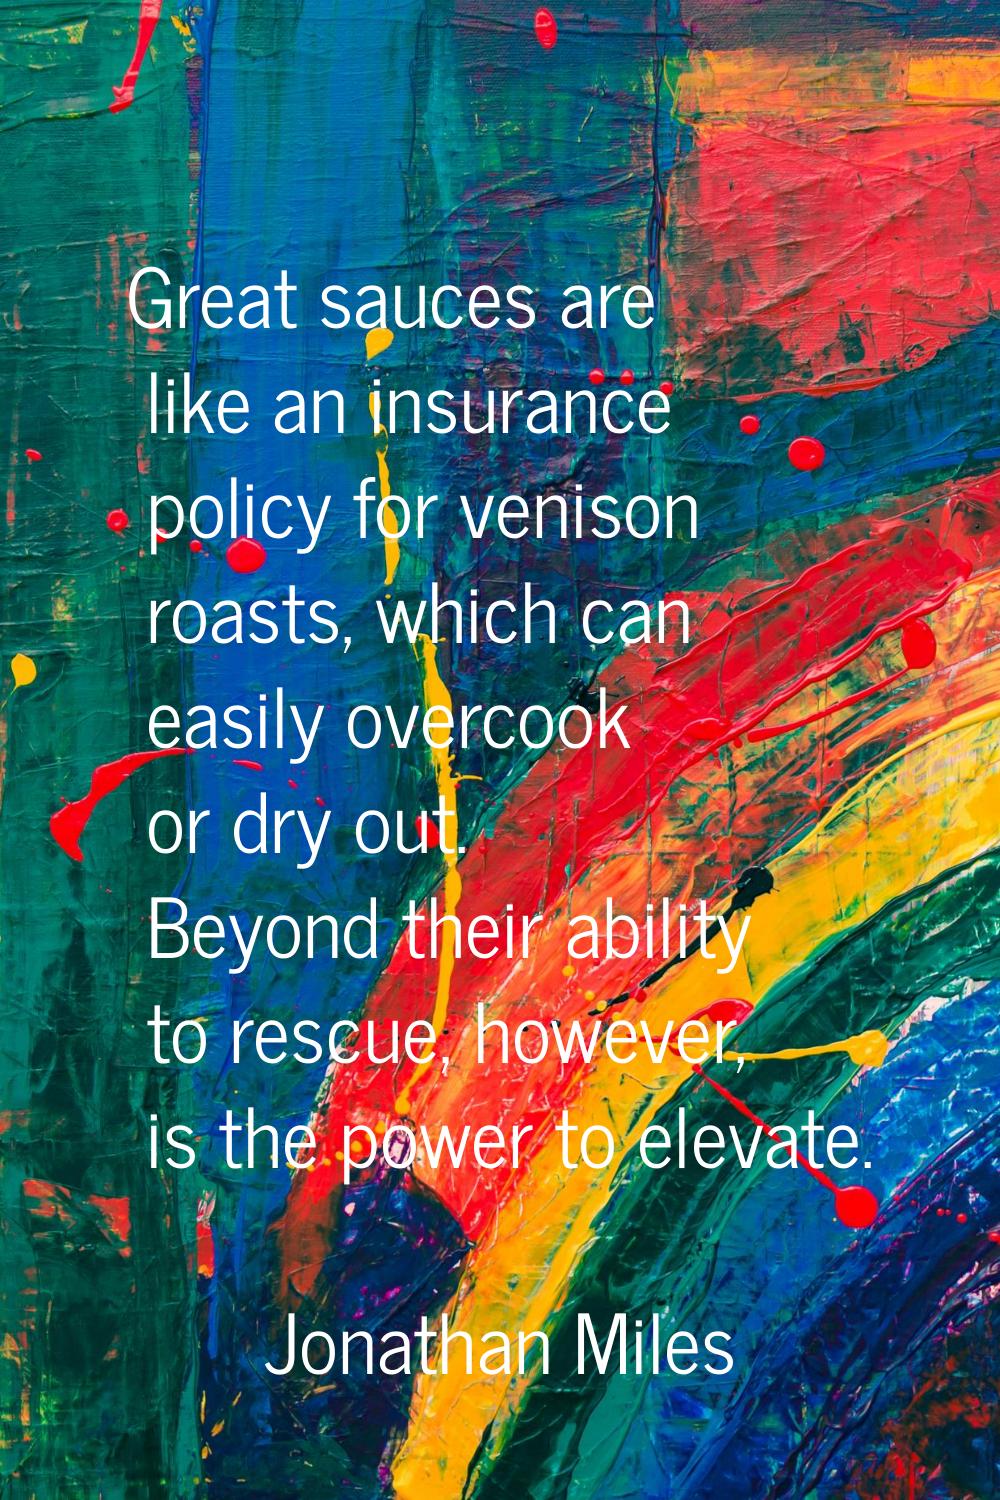 Great sauces are like an insurance policy for venison roasts, which can easily overcook or dry out.